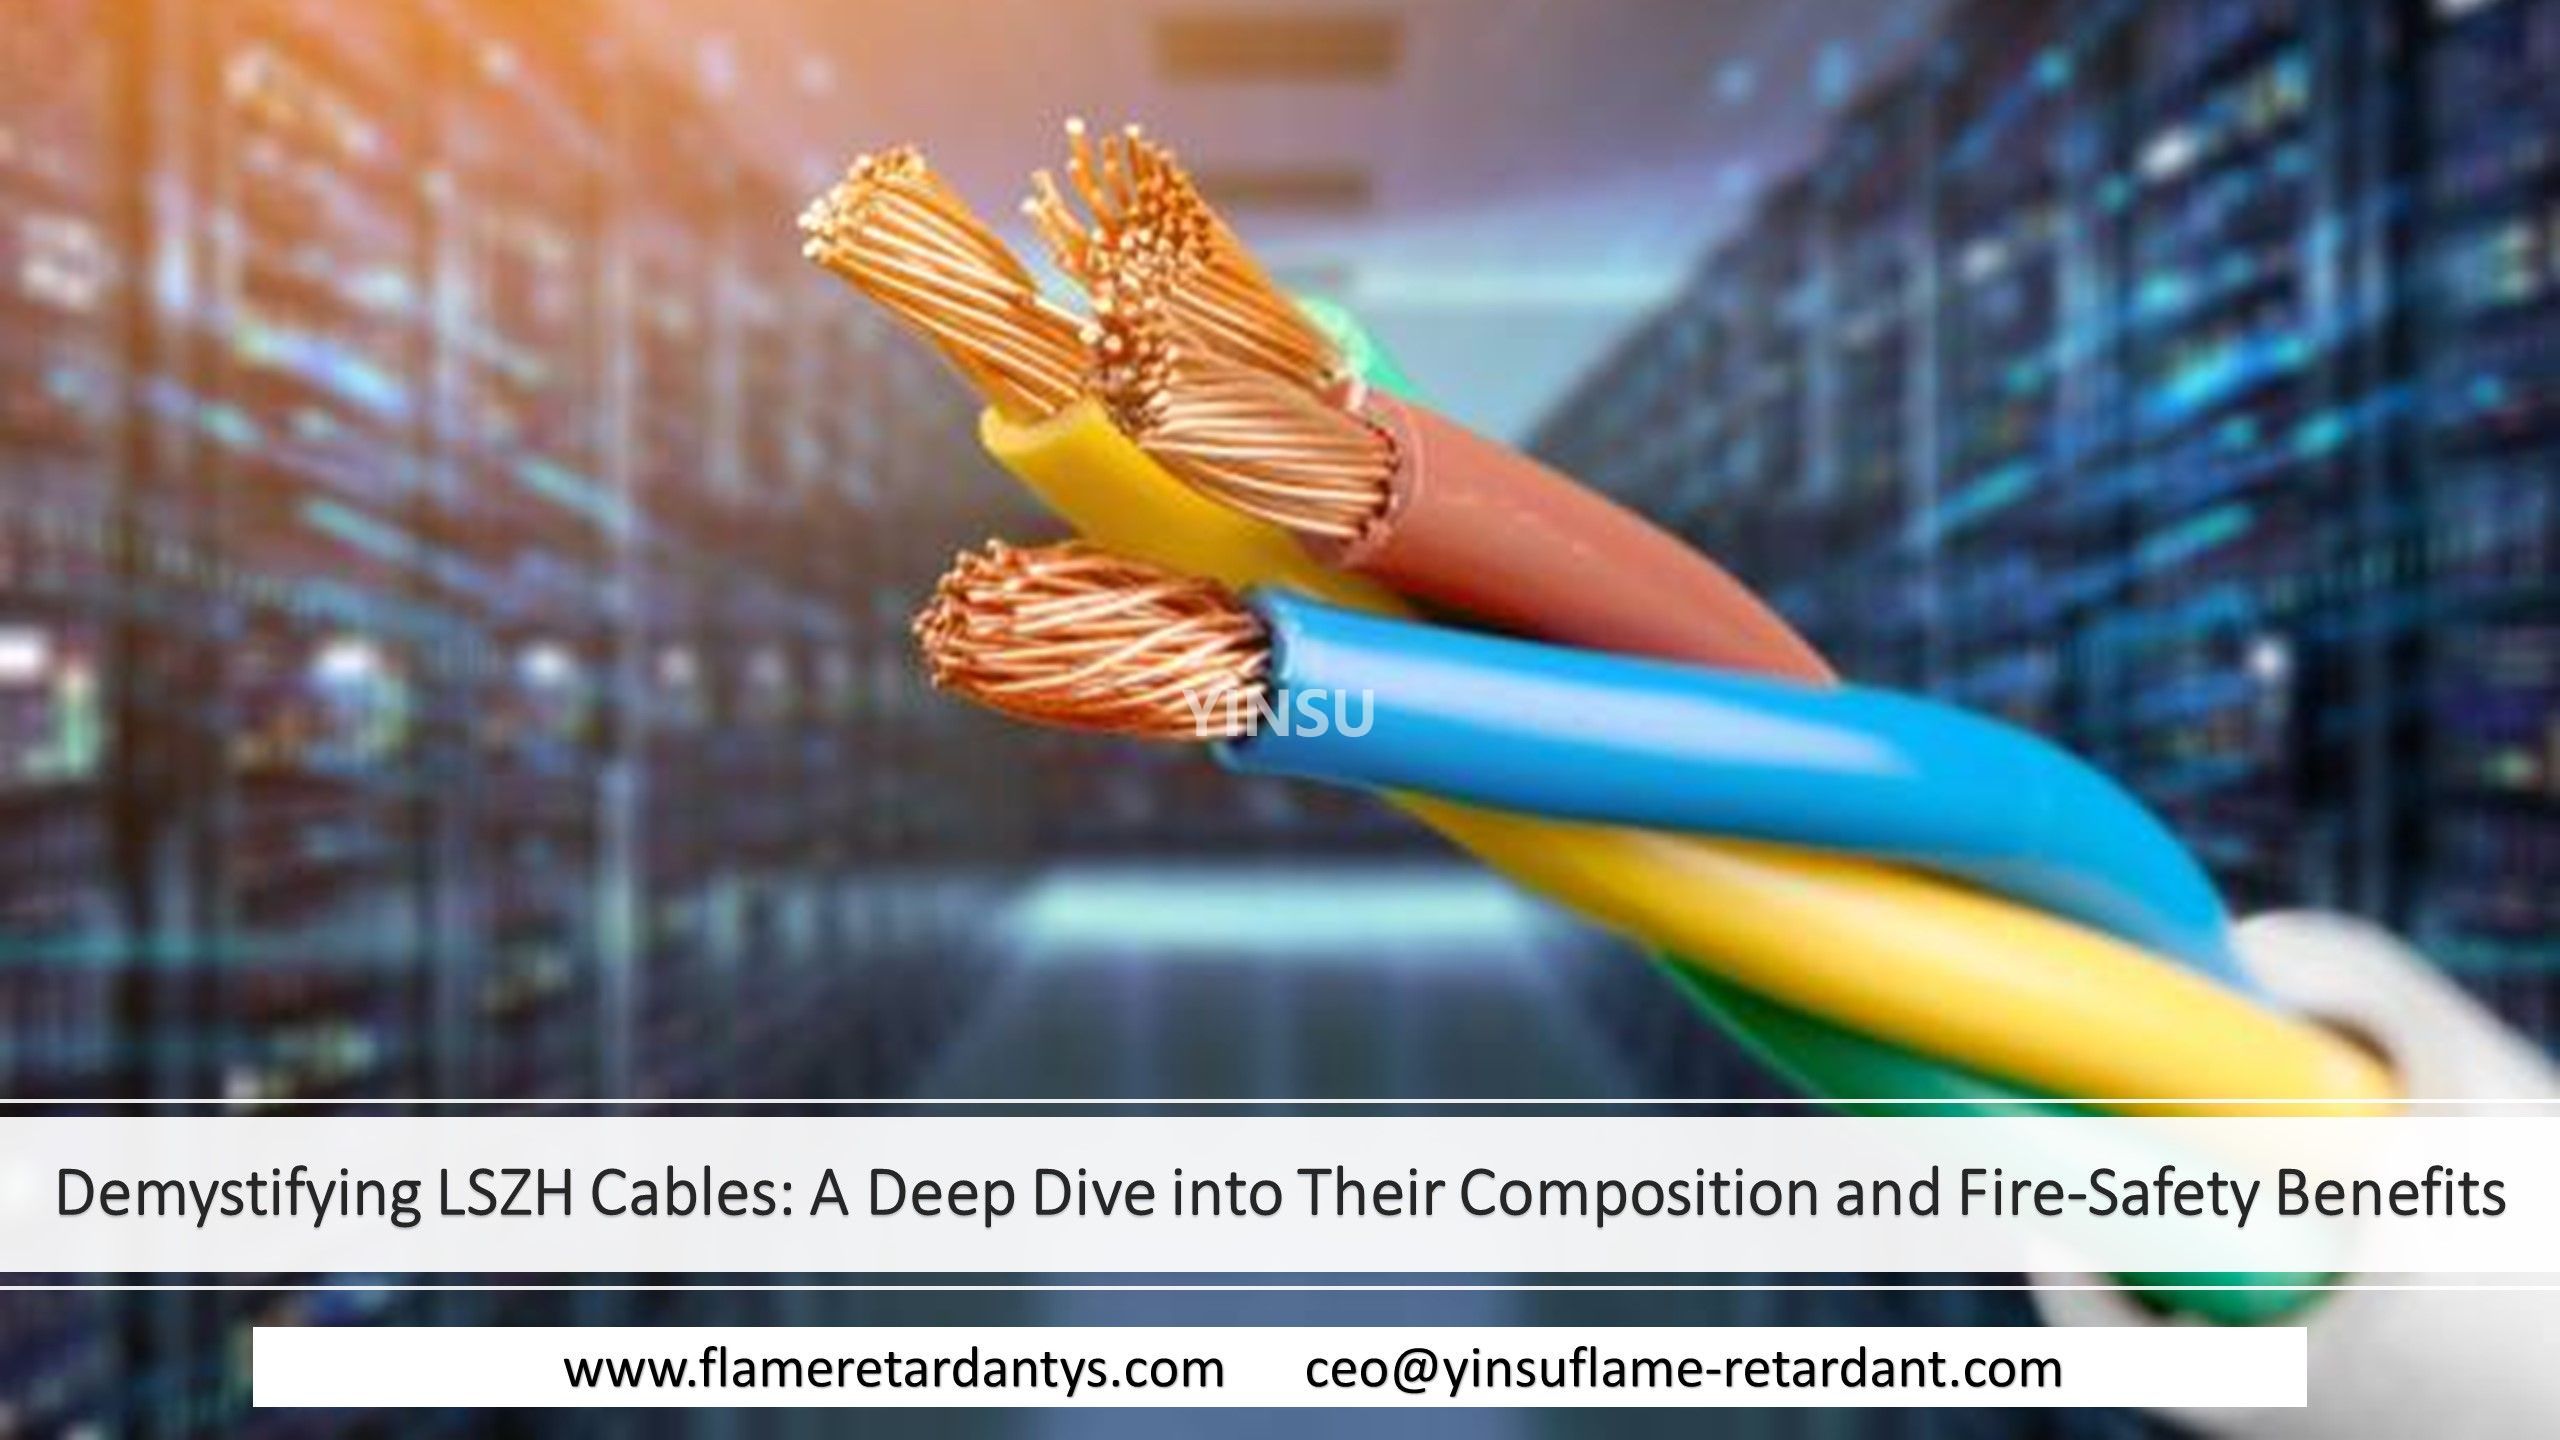 Demystifying LSZH Cables A Deep Dive into Their Composition and Fire-Safety Benefits